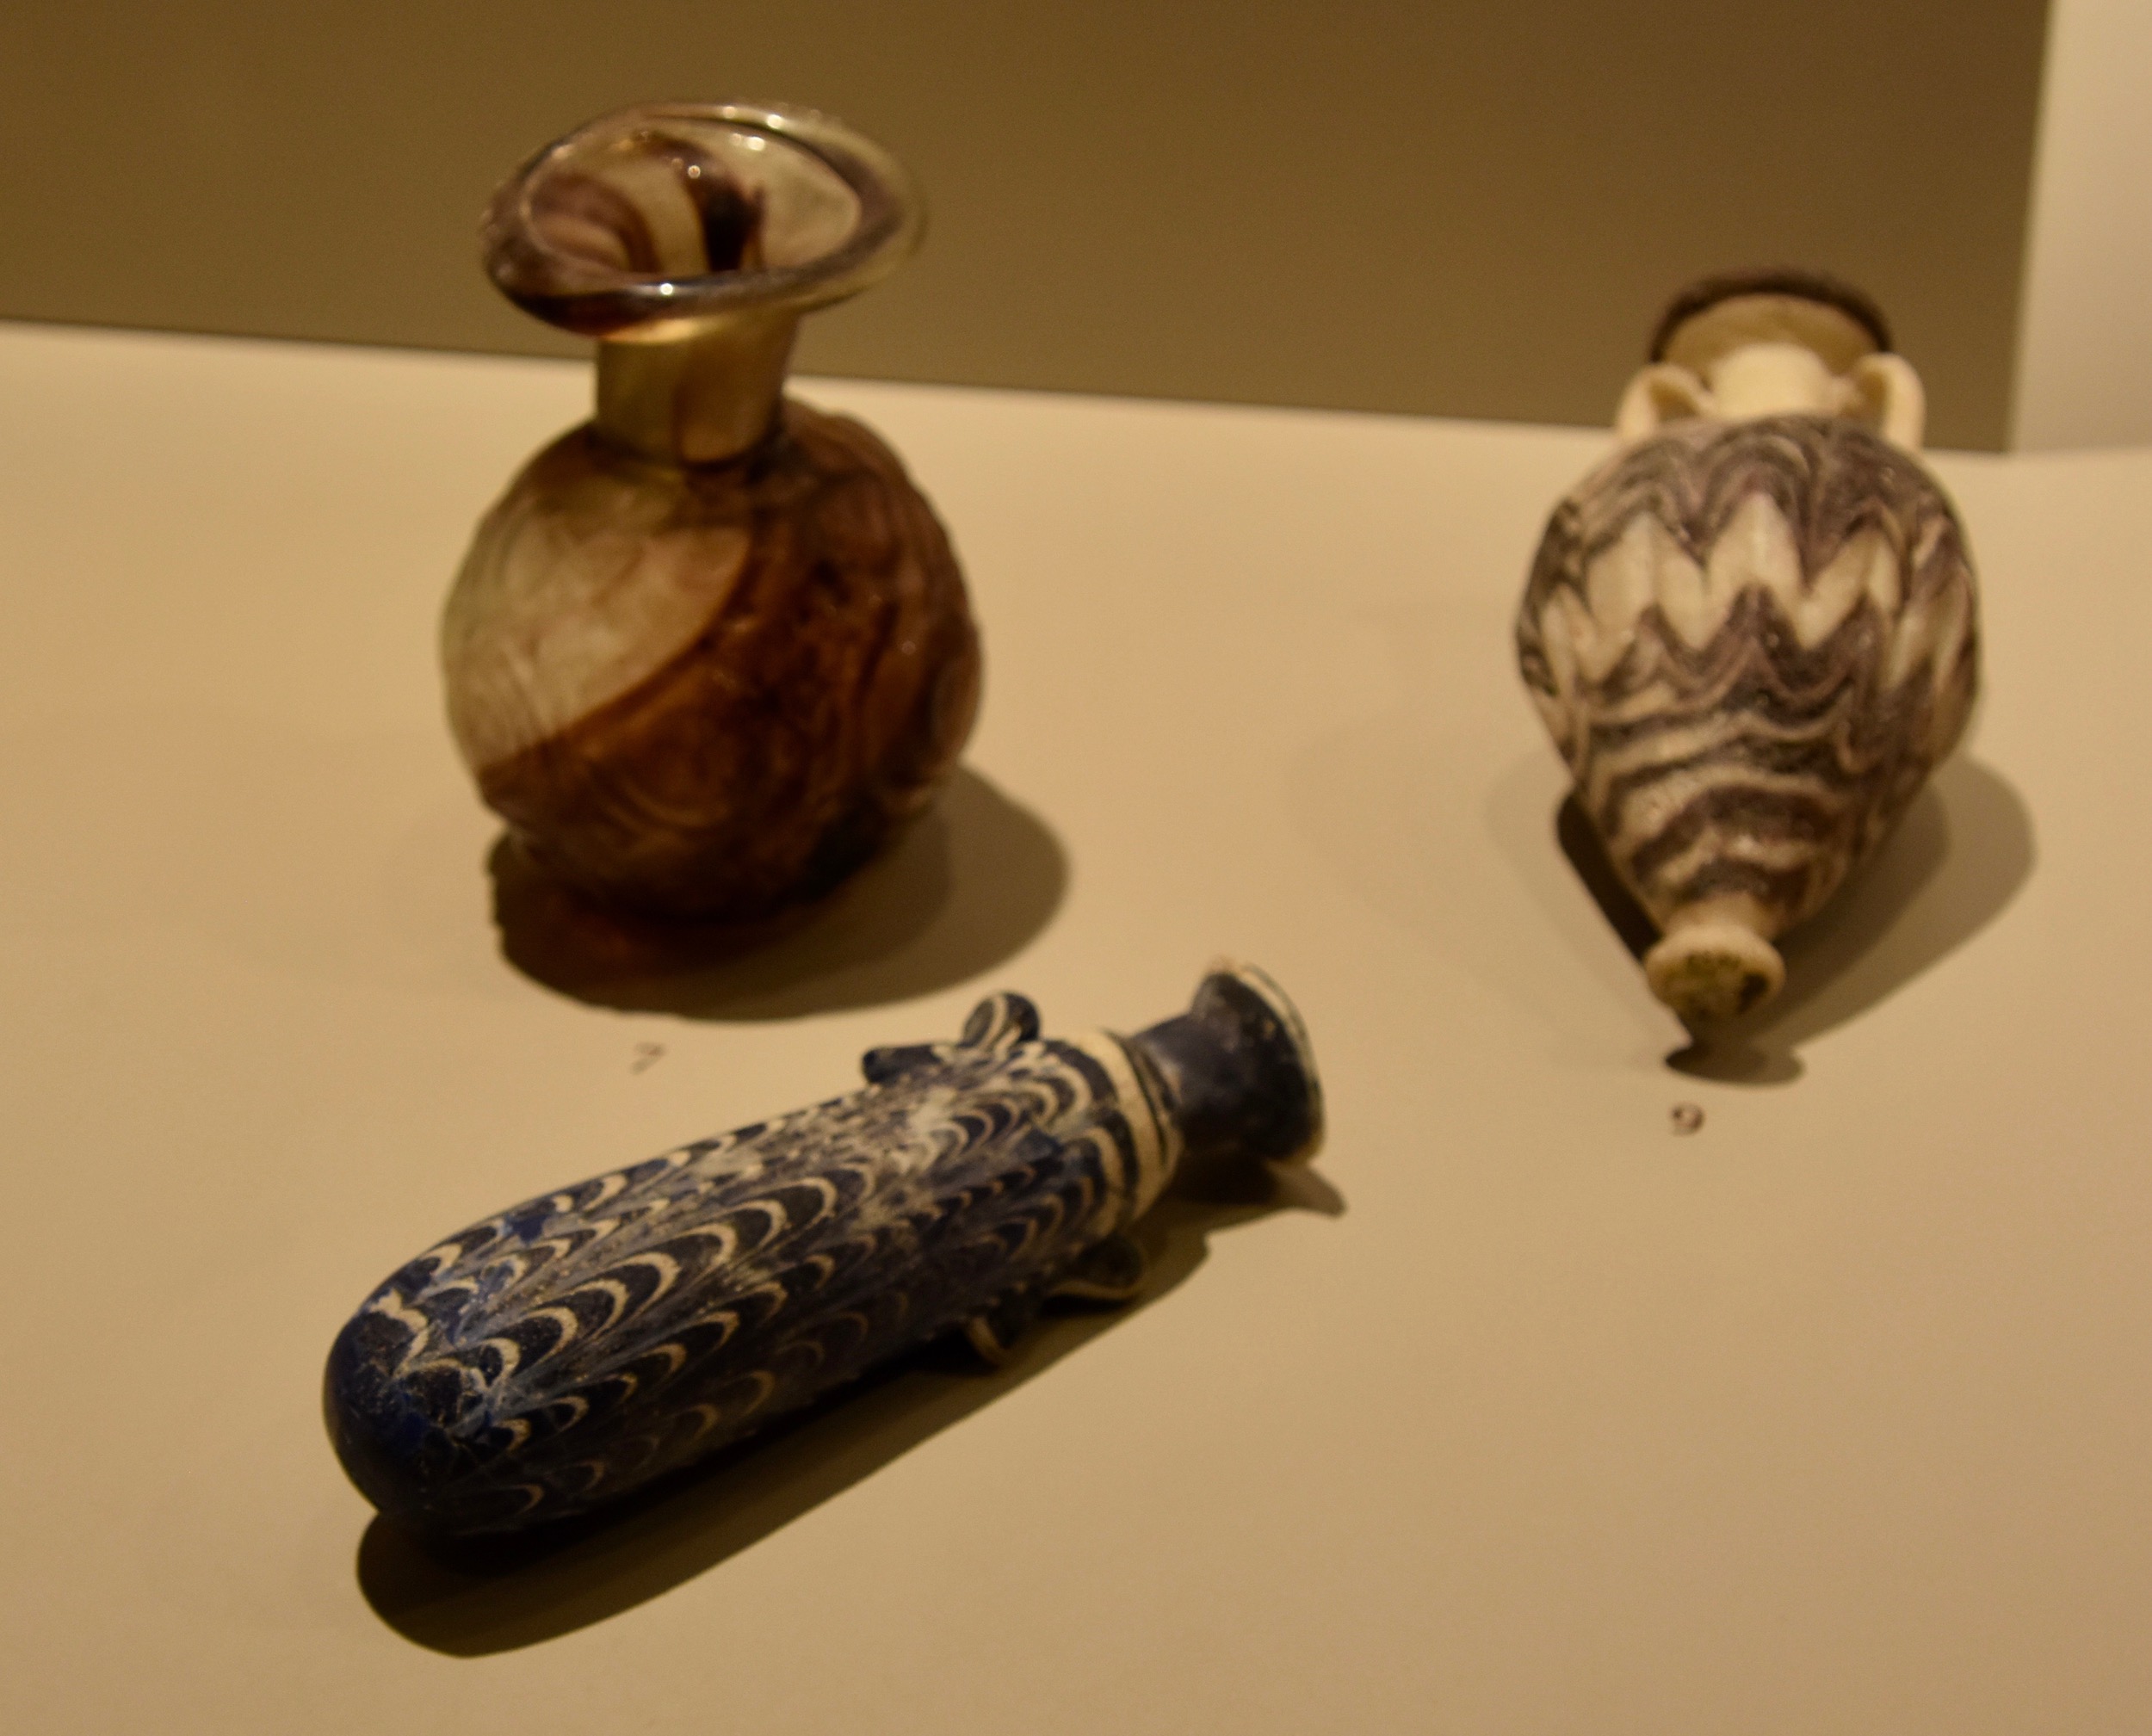 Two Thousand Year Old Glass, the Ephesus Museum